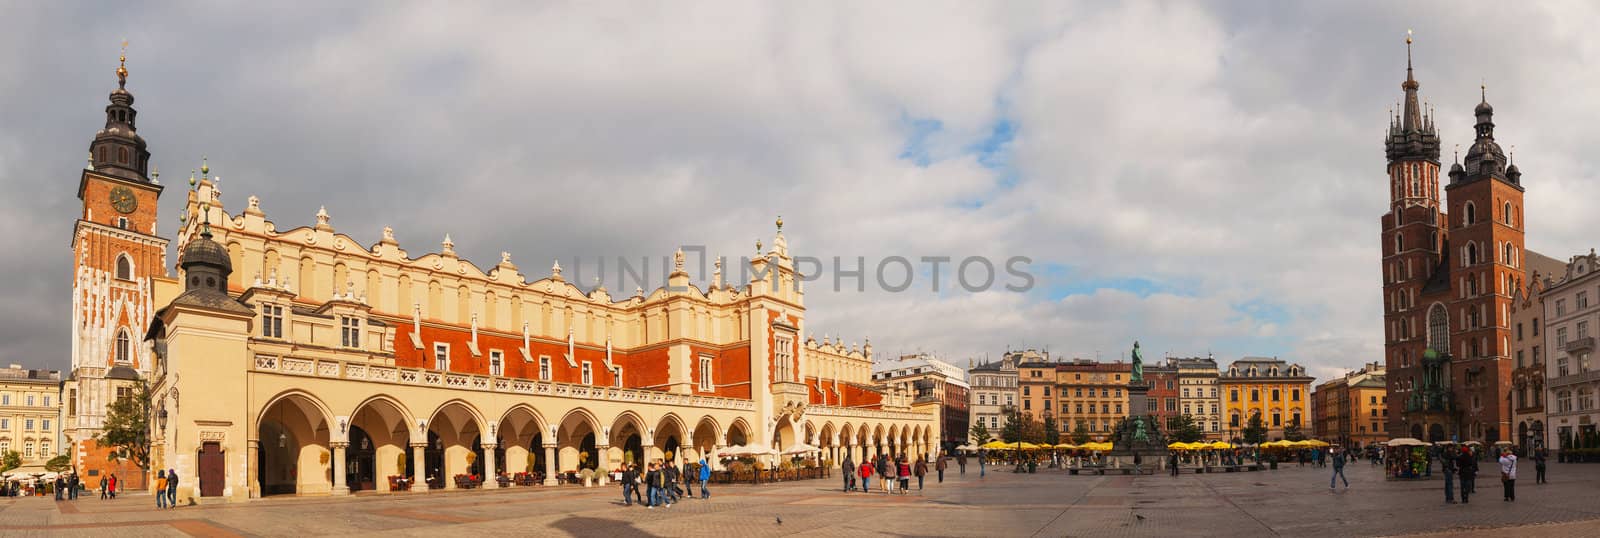 KRAKOW, POLAND - OCTOBER 11: Old market square with tourists on October 11, 2012 in Krakow. It's a principal urban space located at the center of the city and – at roughly 40,000 sq. m – it is the largest medieval town square in Europe.